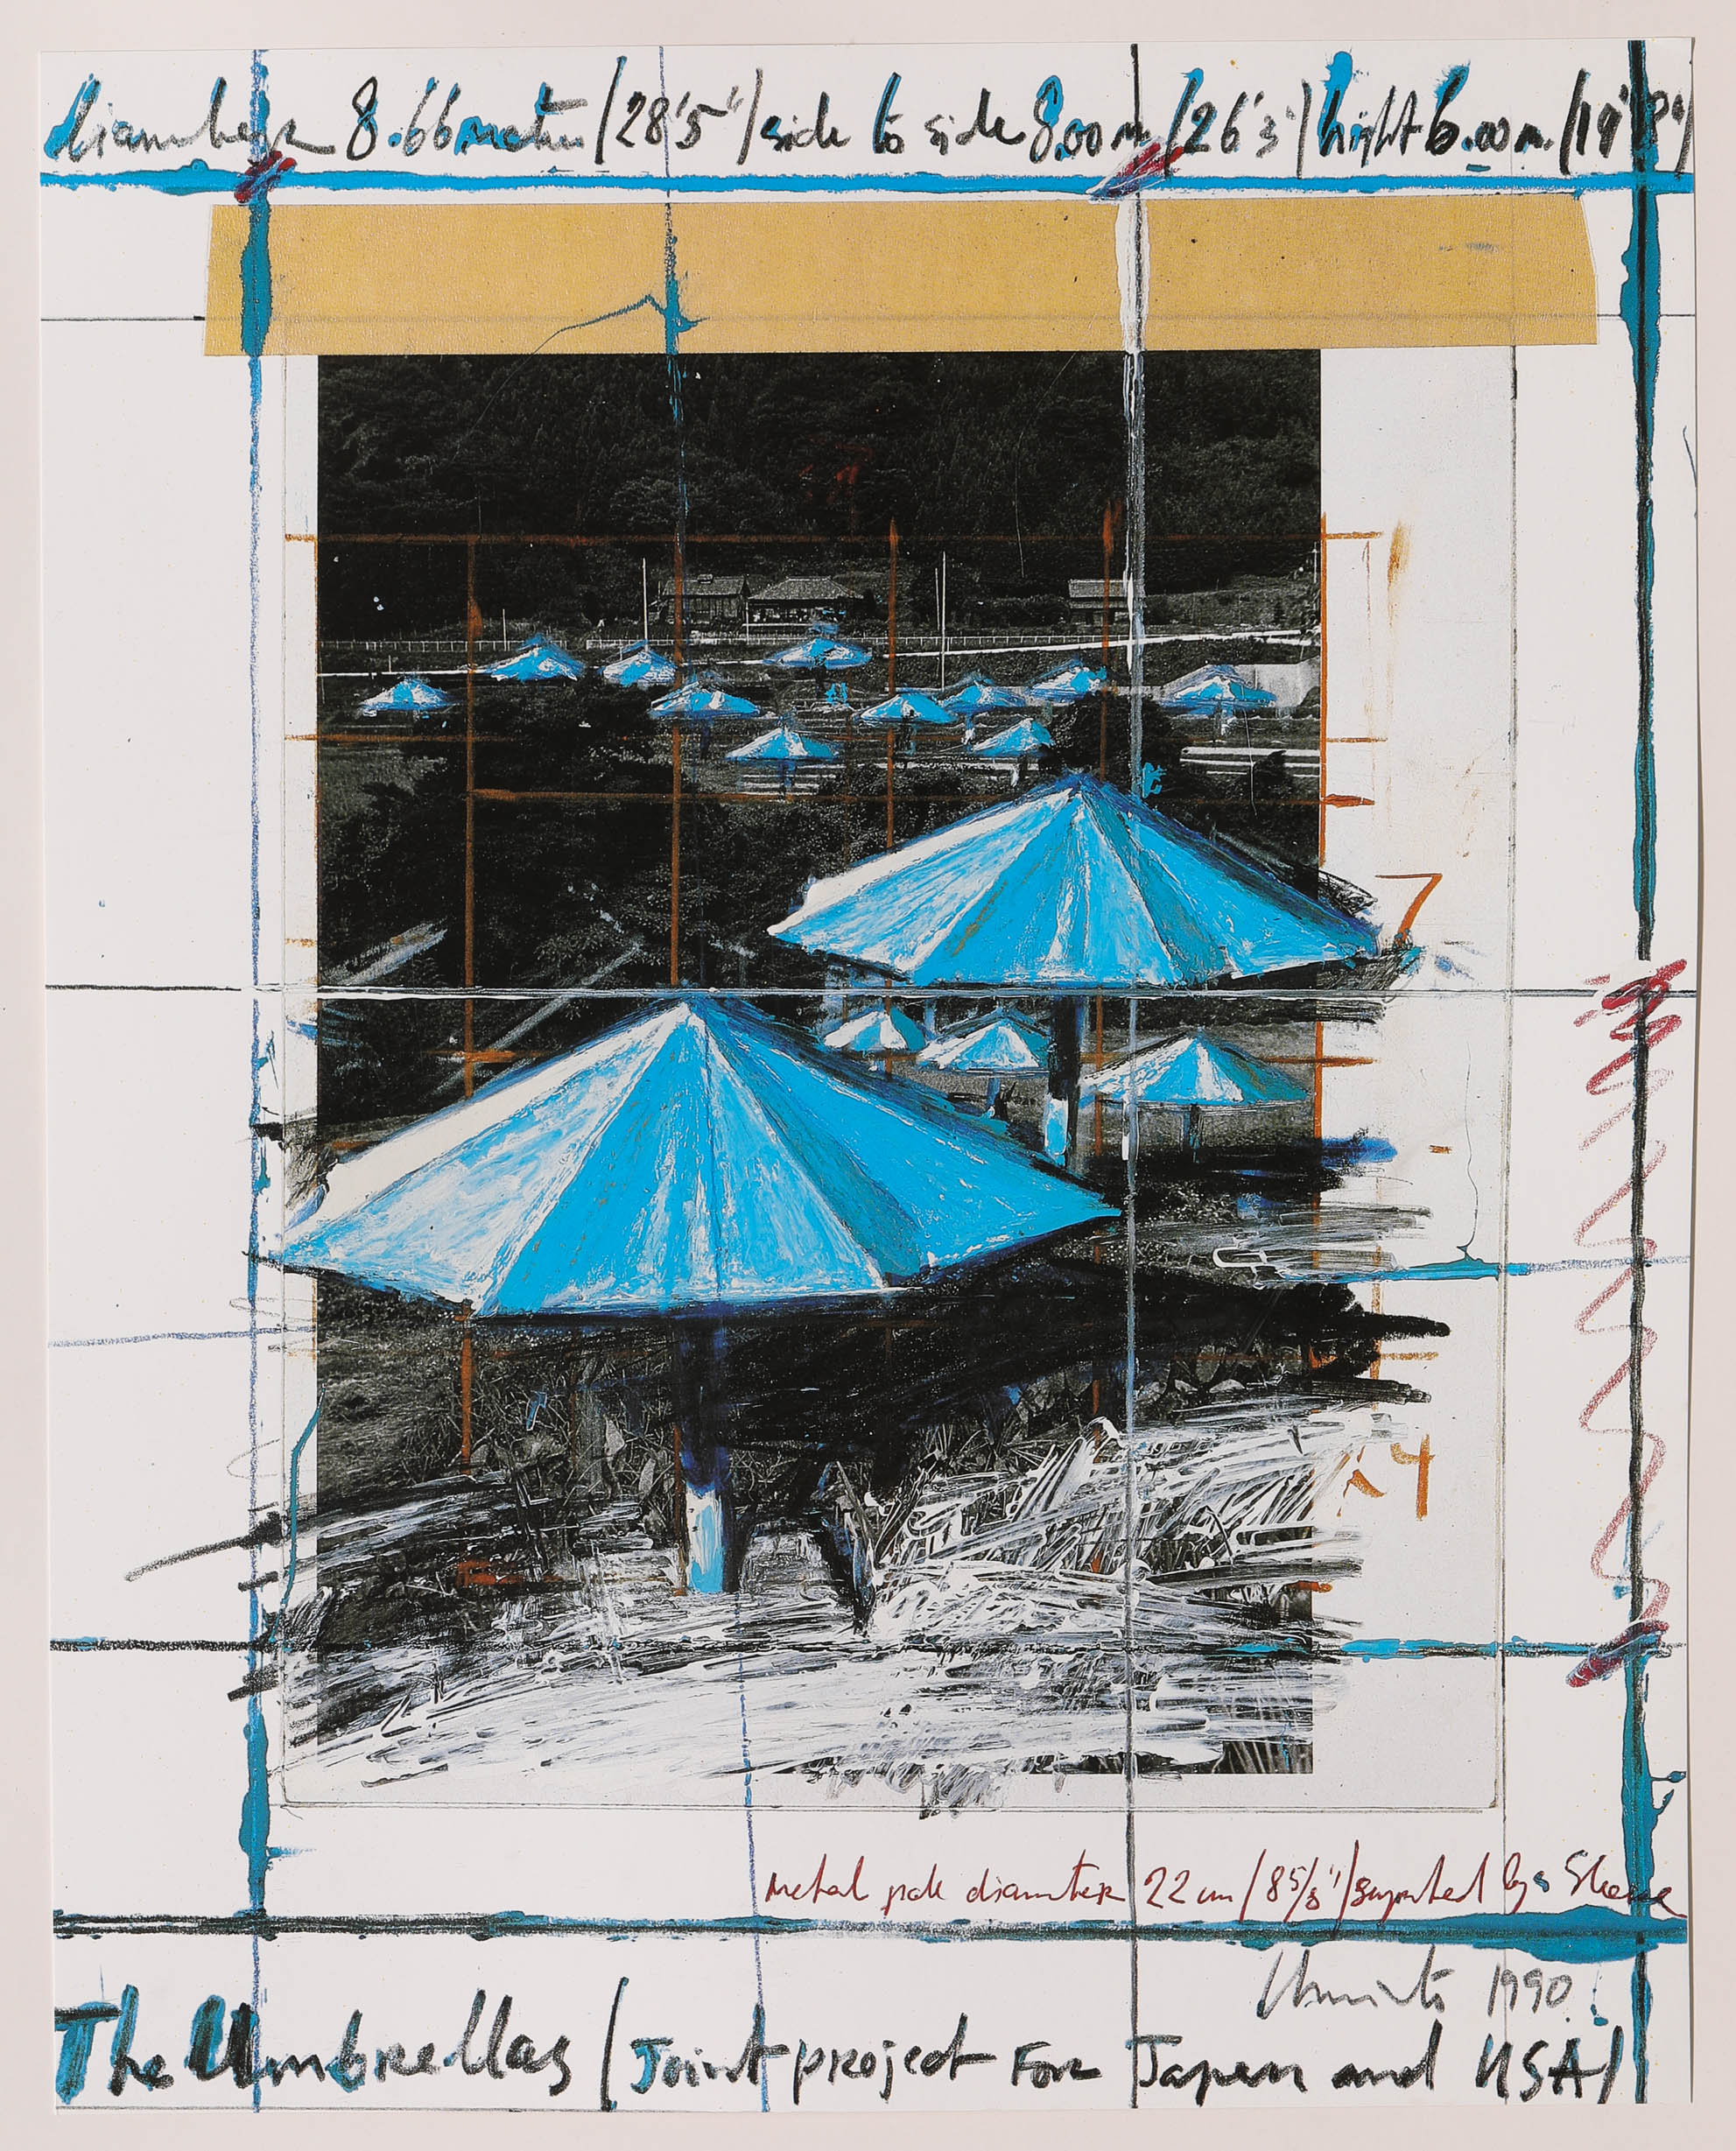 Christo*, The Umbrellas. Joint Project for Japan and U.S.A. 1991 - Image 3 of 7